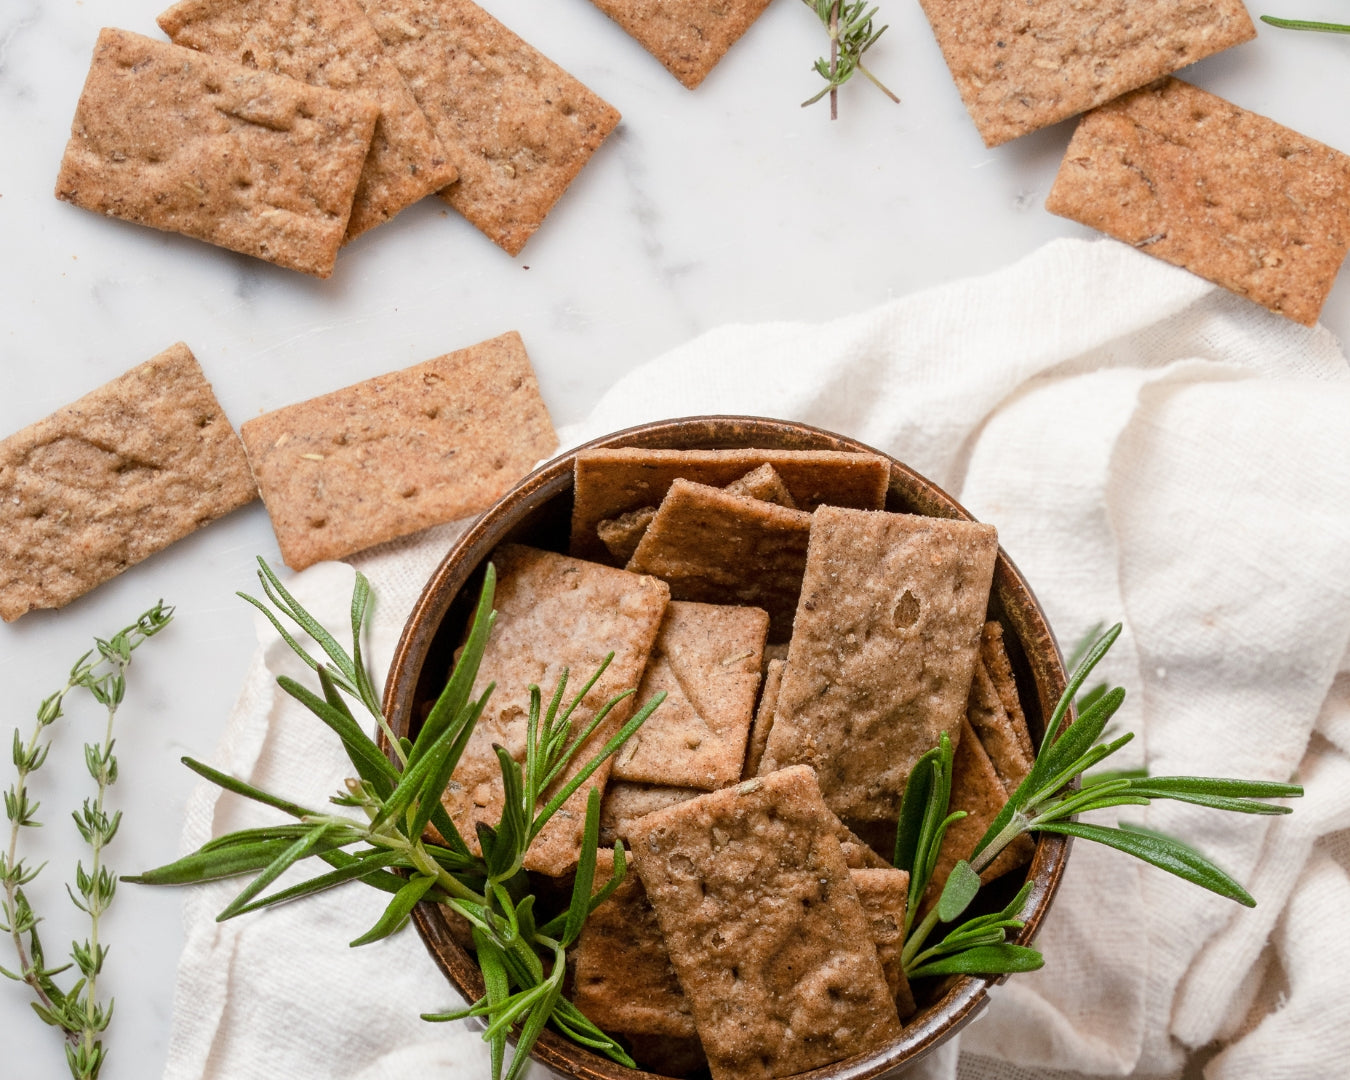 SMALL GIANTS BITES - CRACKERS WITH CRICKET FLOUR - ROSEMARY AND THYME